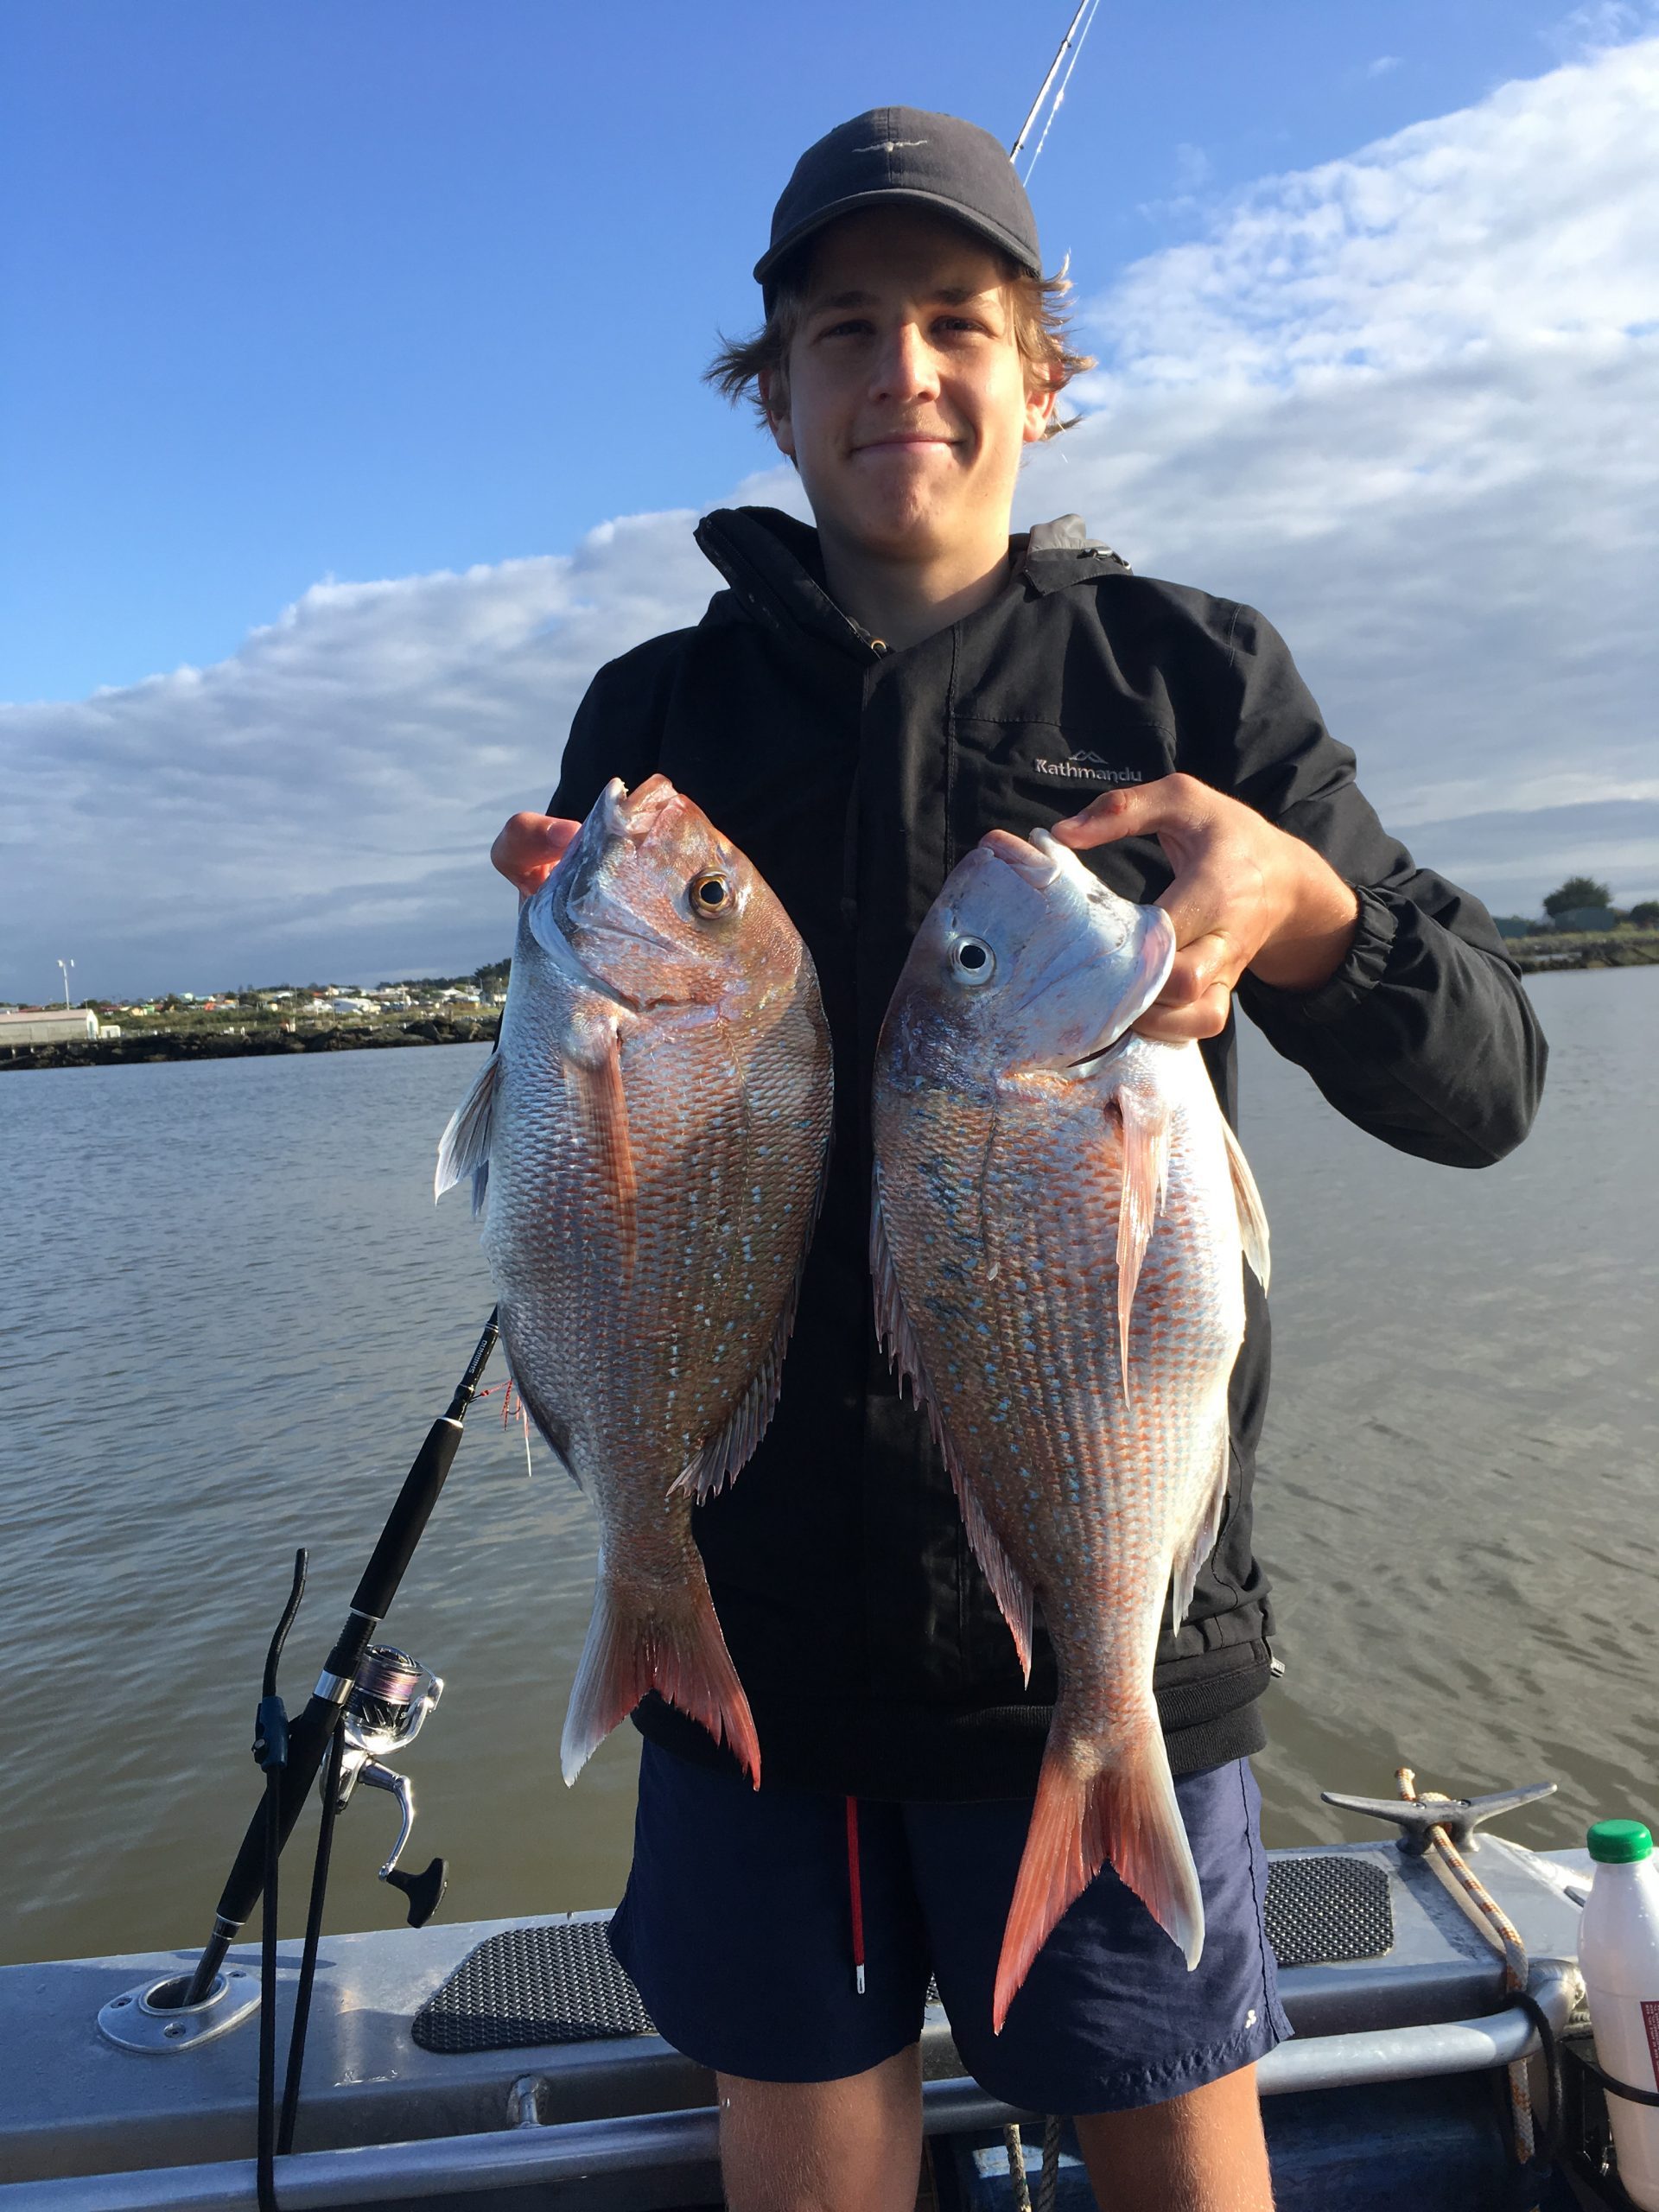 Cameron Russel caught these big Snapper on SnapperTackle lures